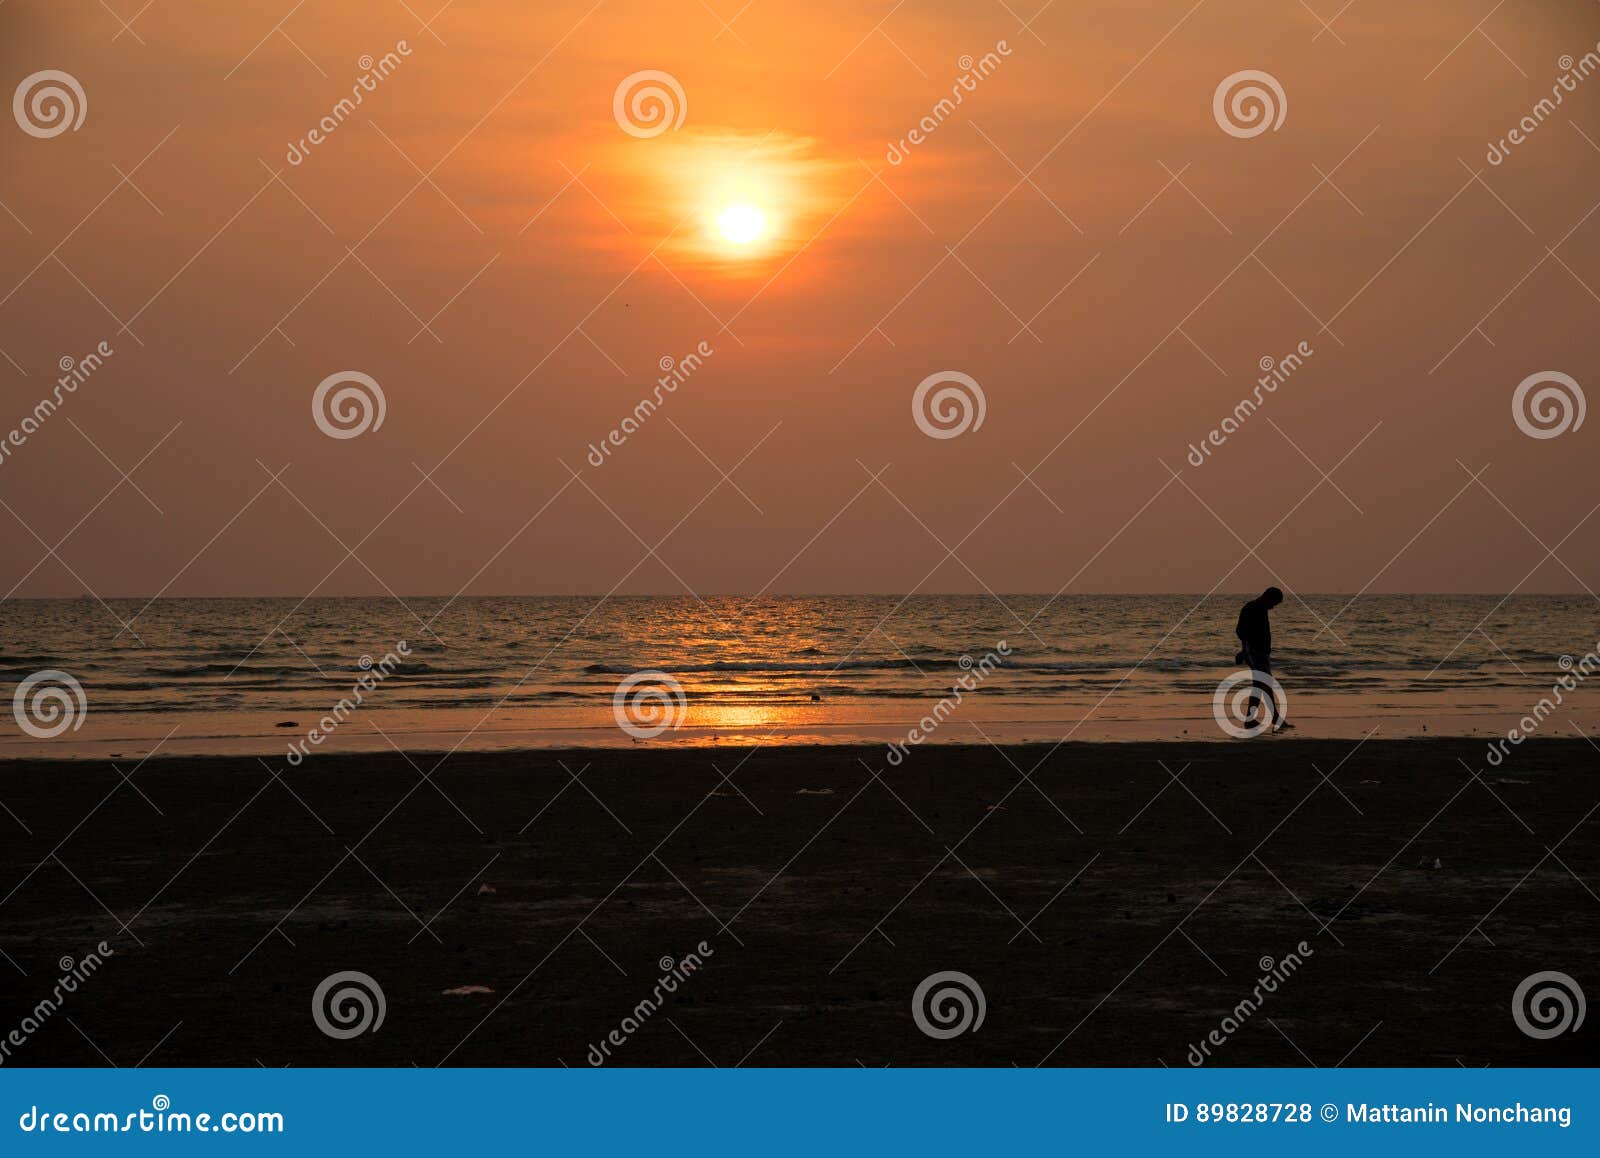 Silhouette Man Playing on Beach Stock Photo - Image of friends, bench ...